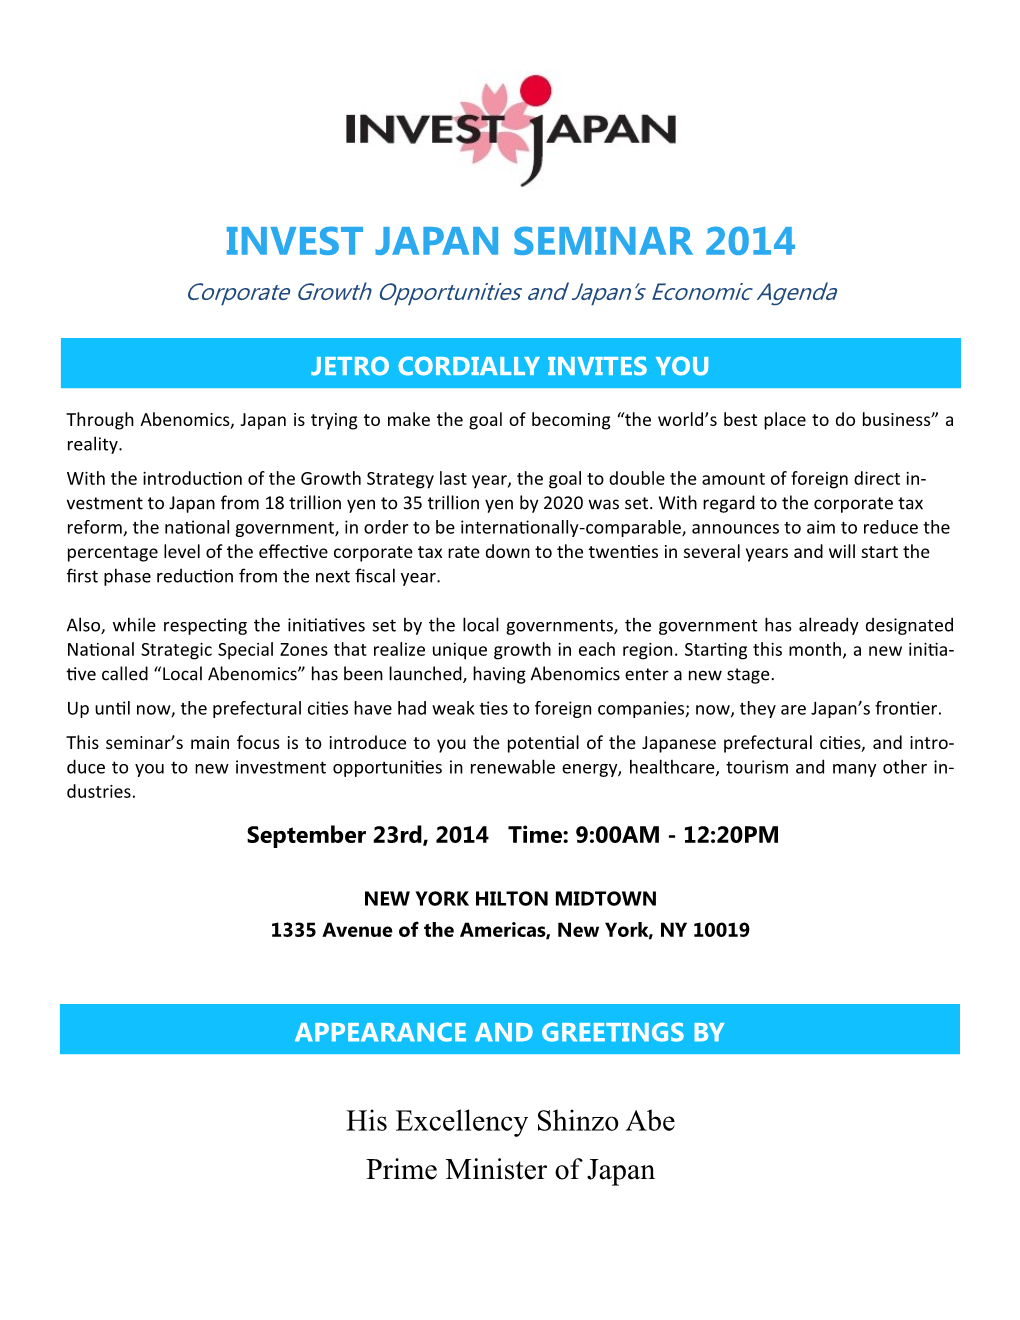 INVEST JAPAN SEMINAR 2014 Corporate Growth Opportunities and Japan’S Economic Agenda